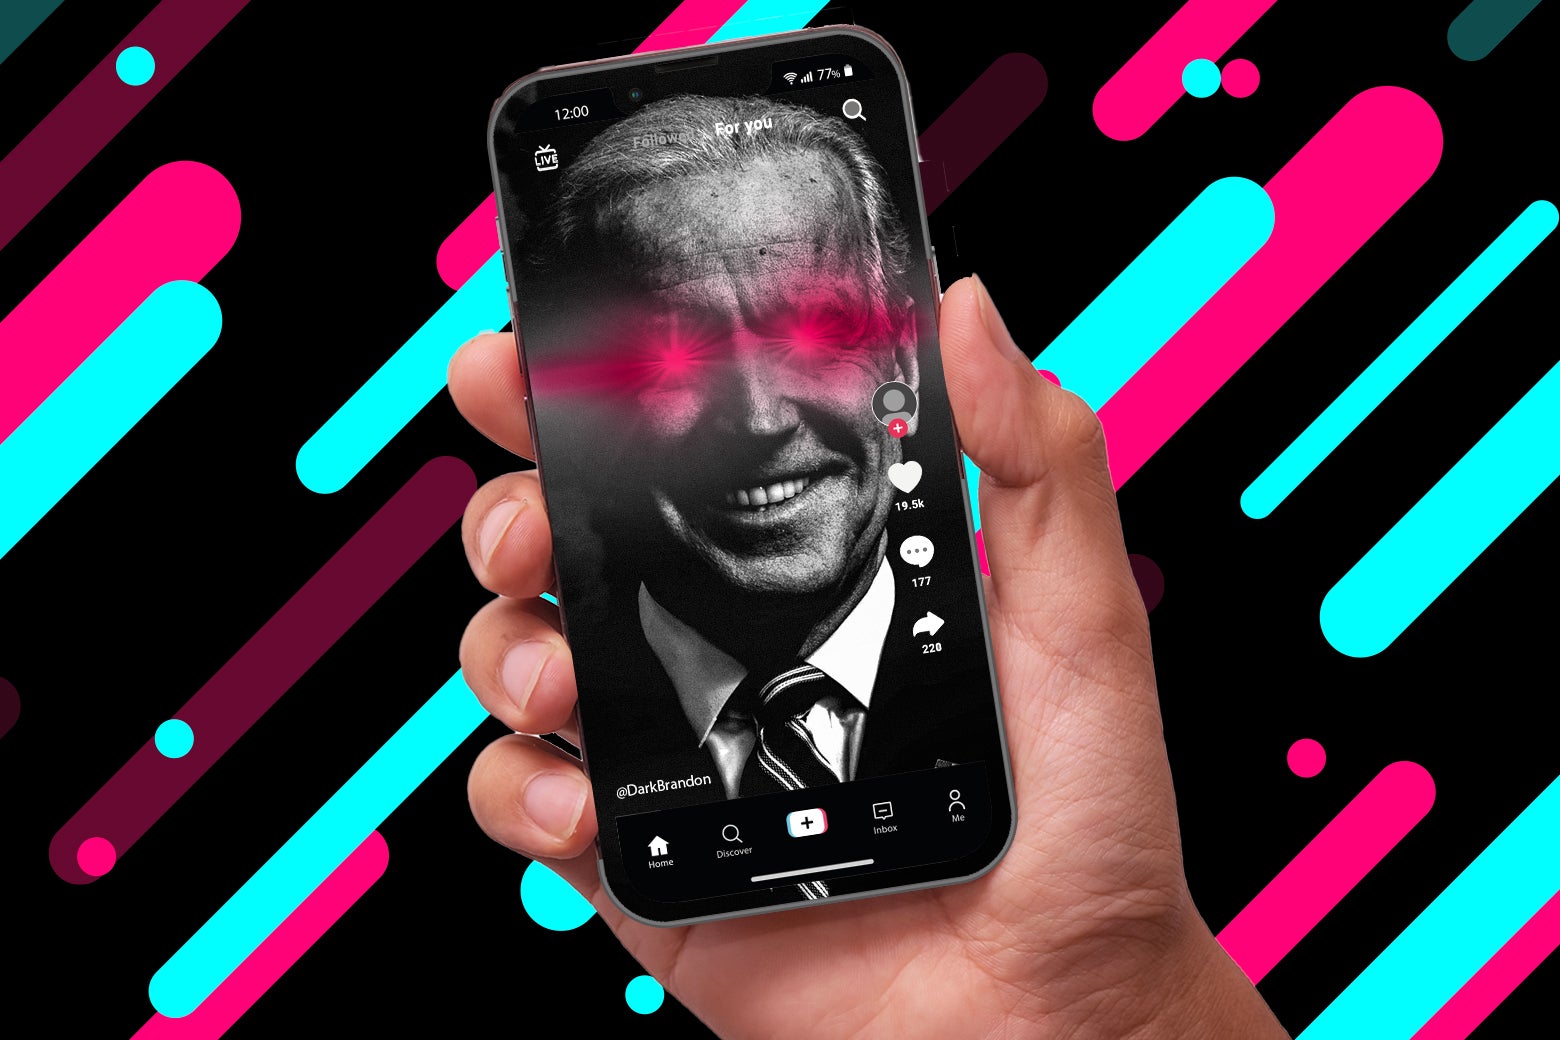 A hand holding a phone that displays an image of a laser-eyed, smiling Dark Brandon.